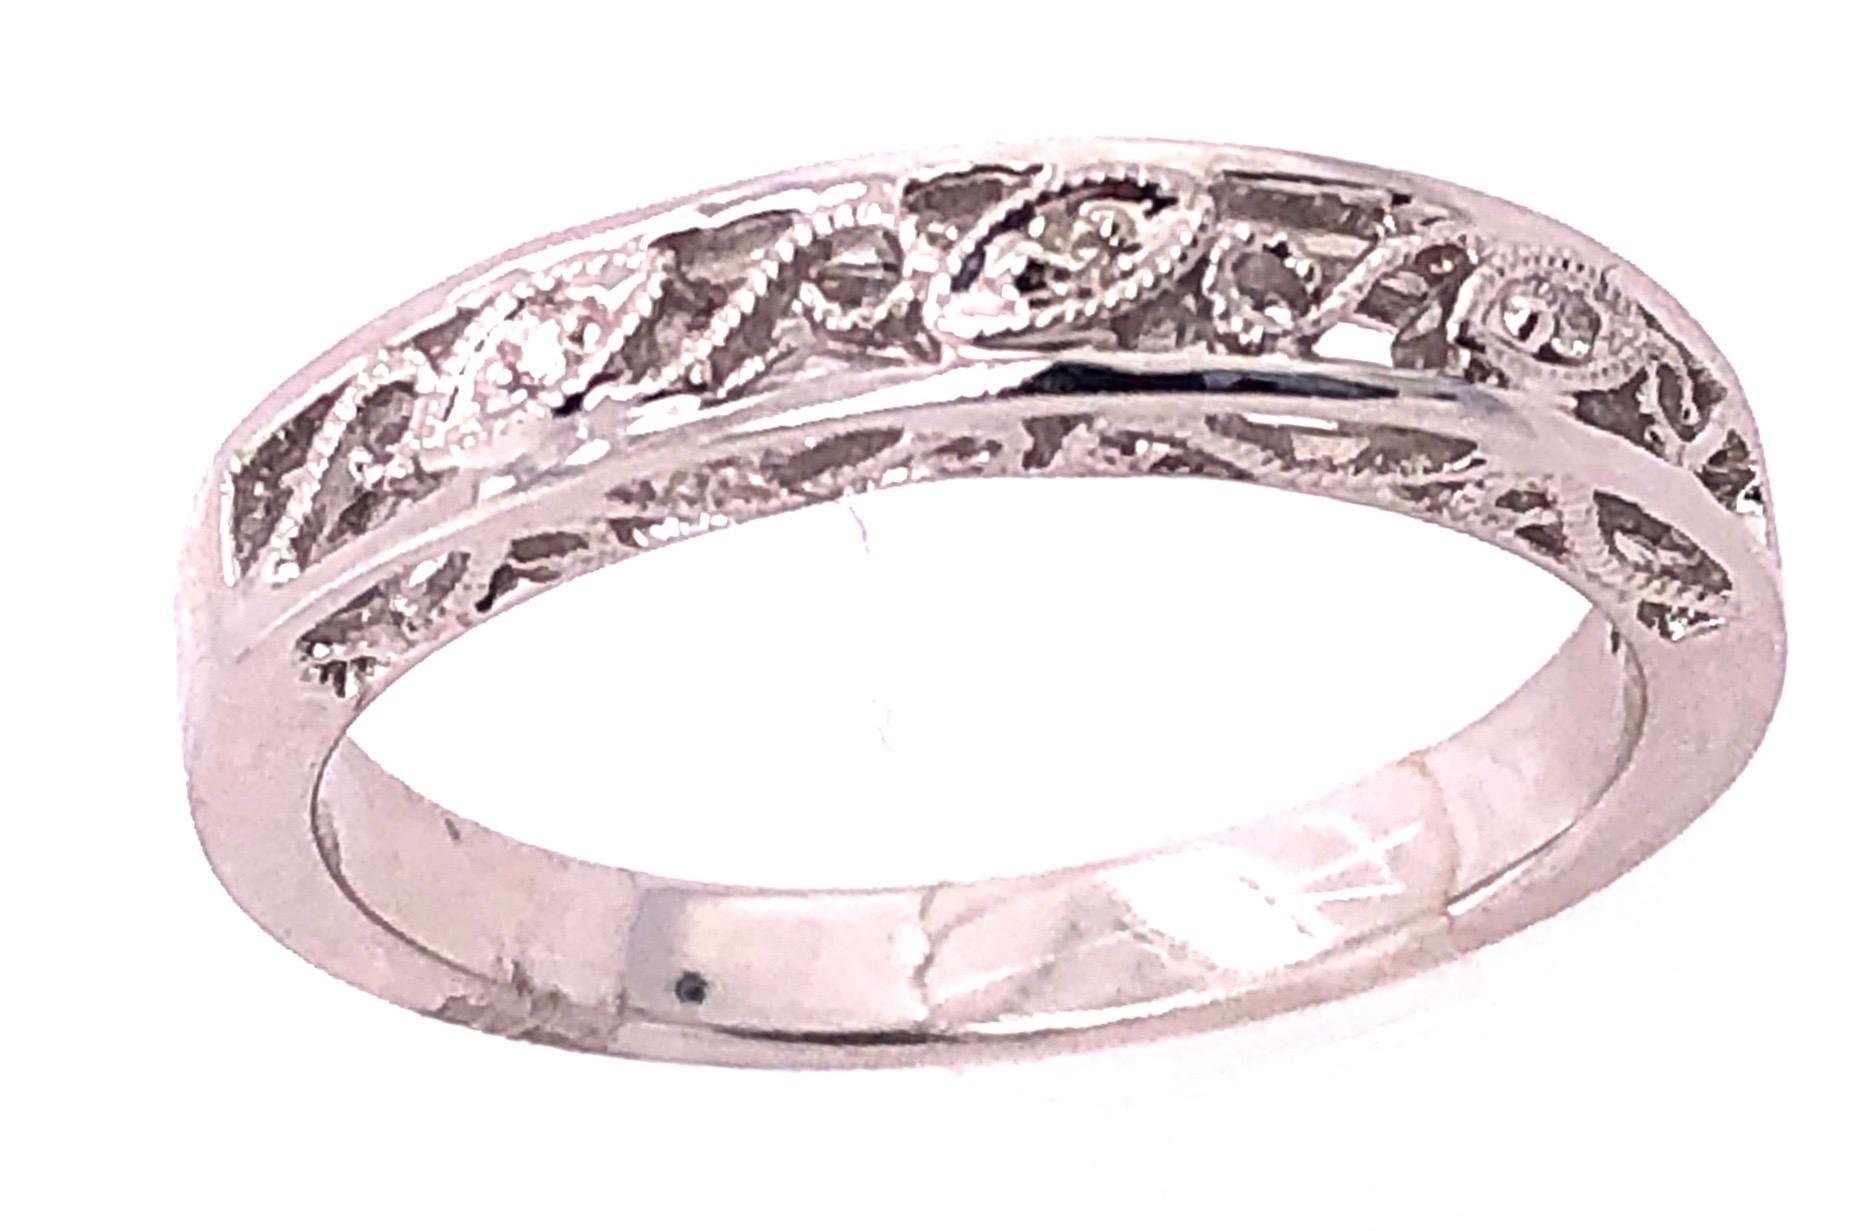 14 Karat White Gold Band Ring with Round Diamonds.
Size 6
3.51 grams total weight.